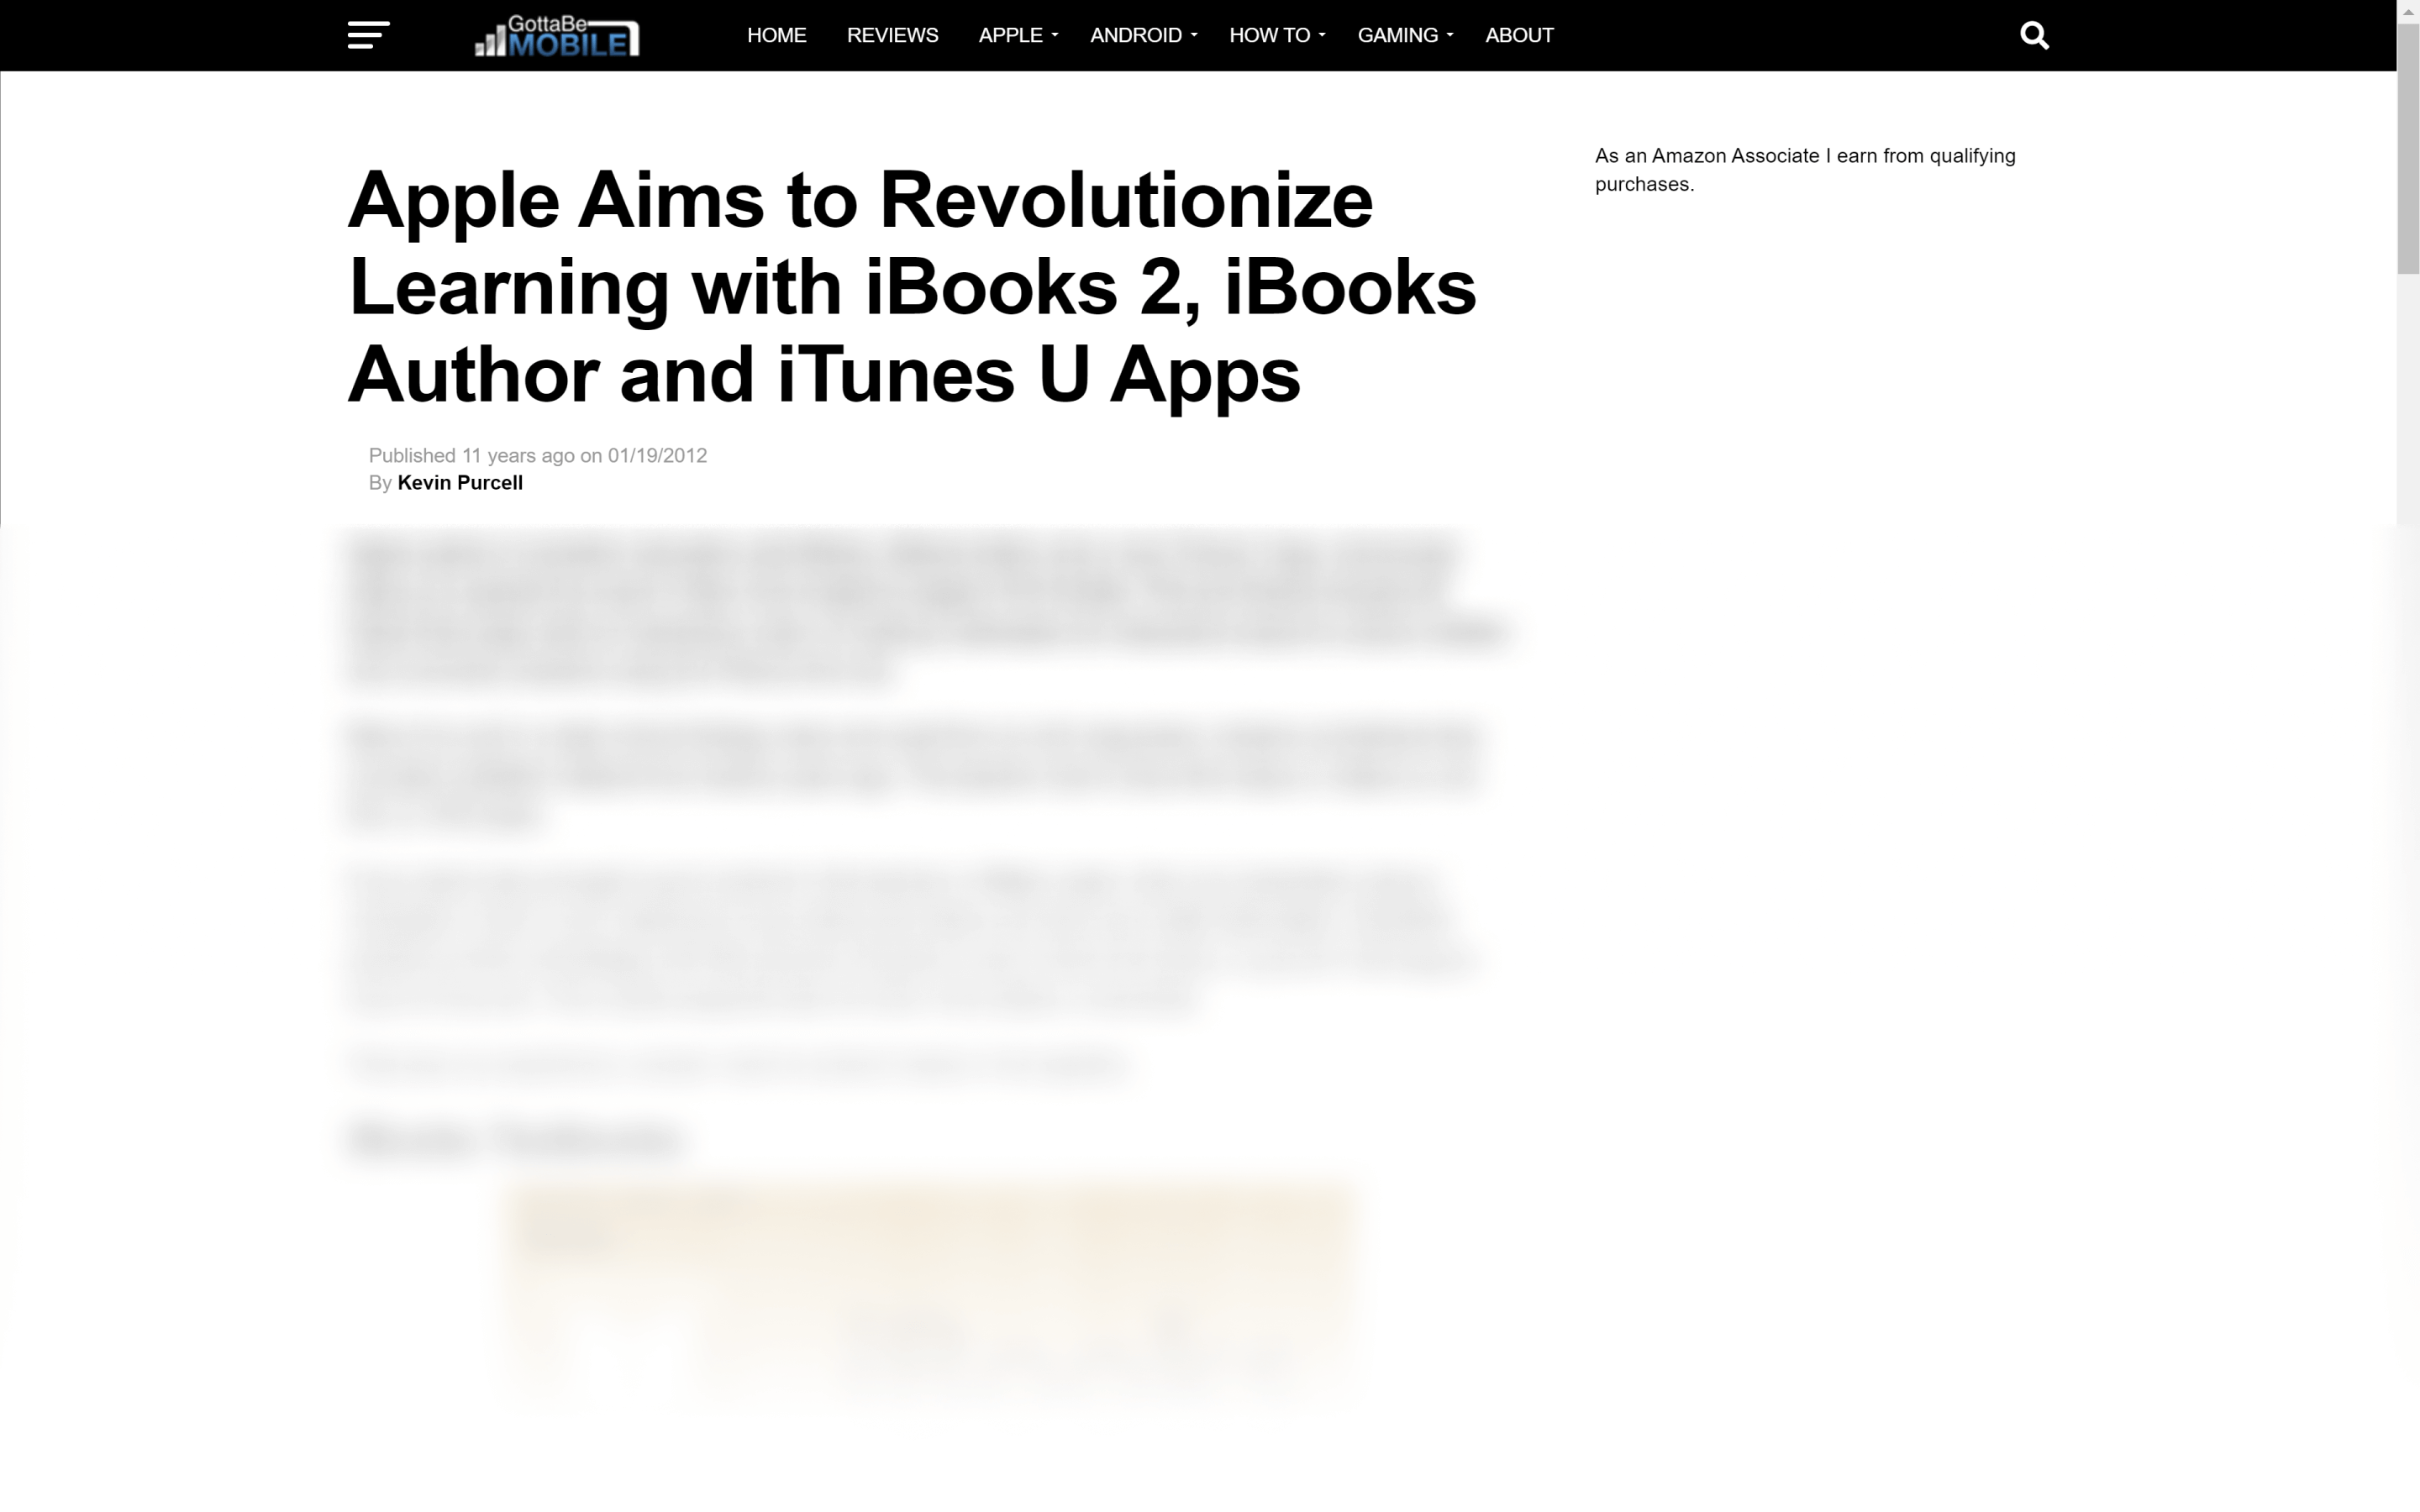 Apple aims to Revolutionize learning with ibook2 